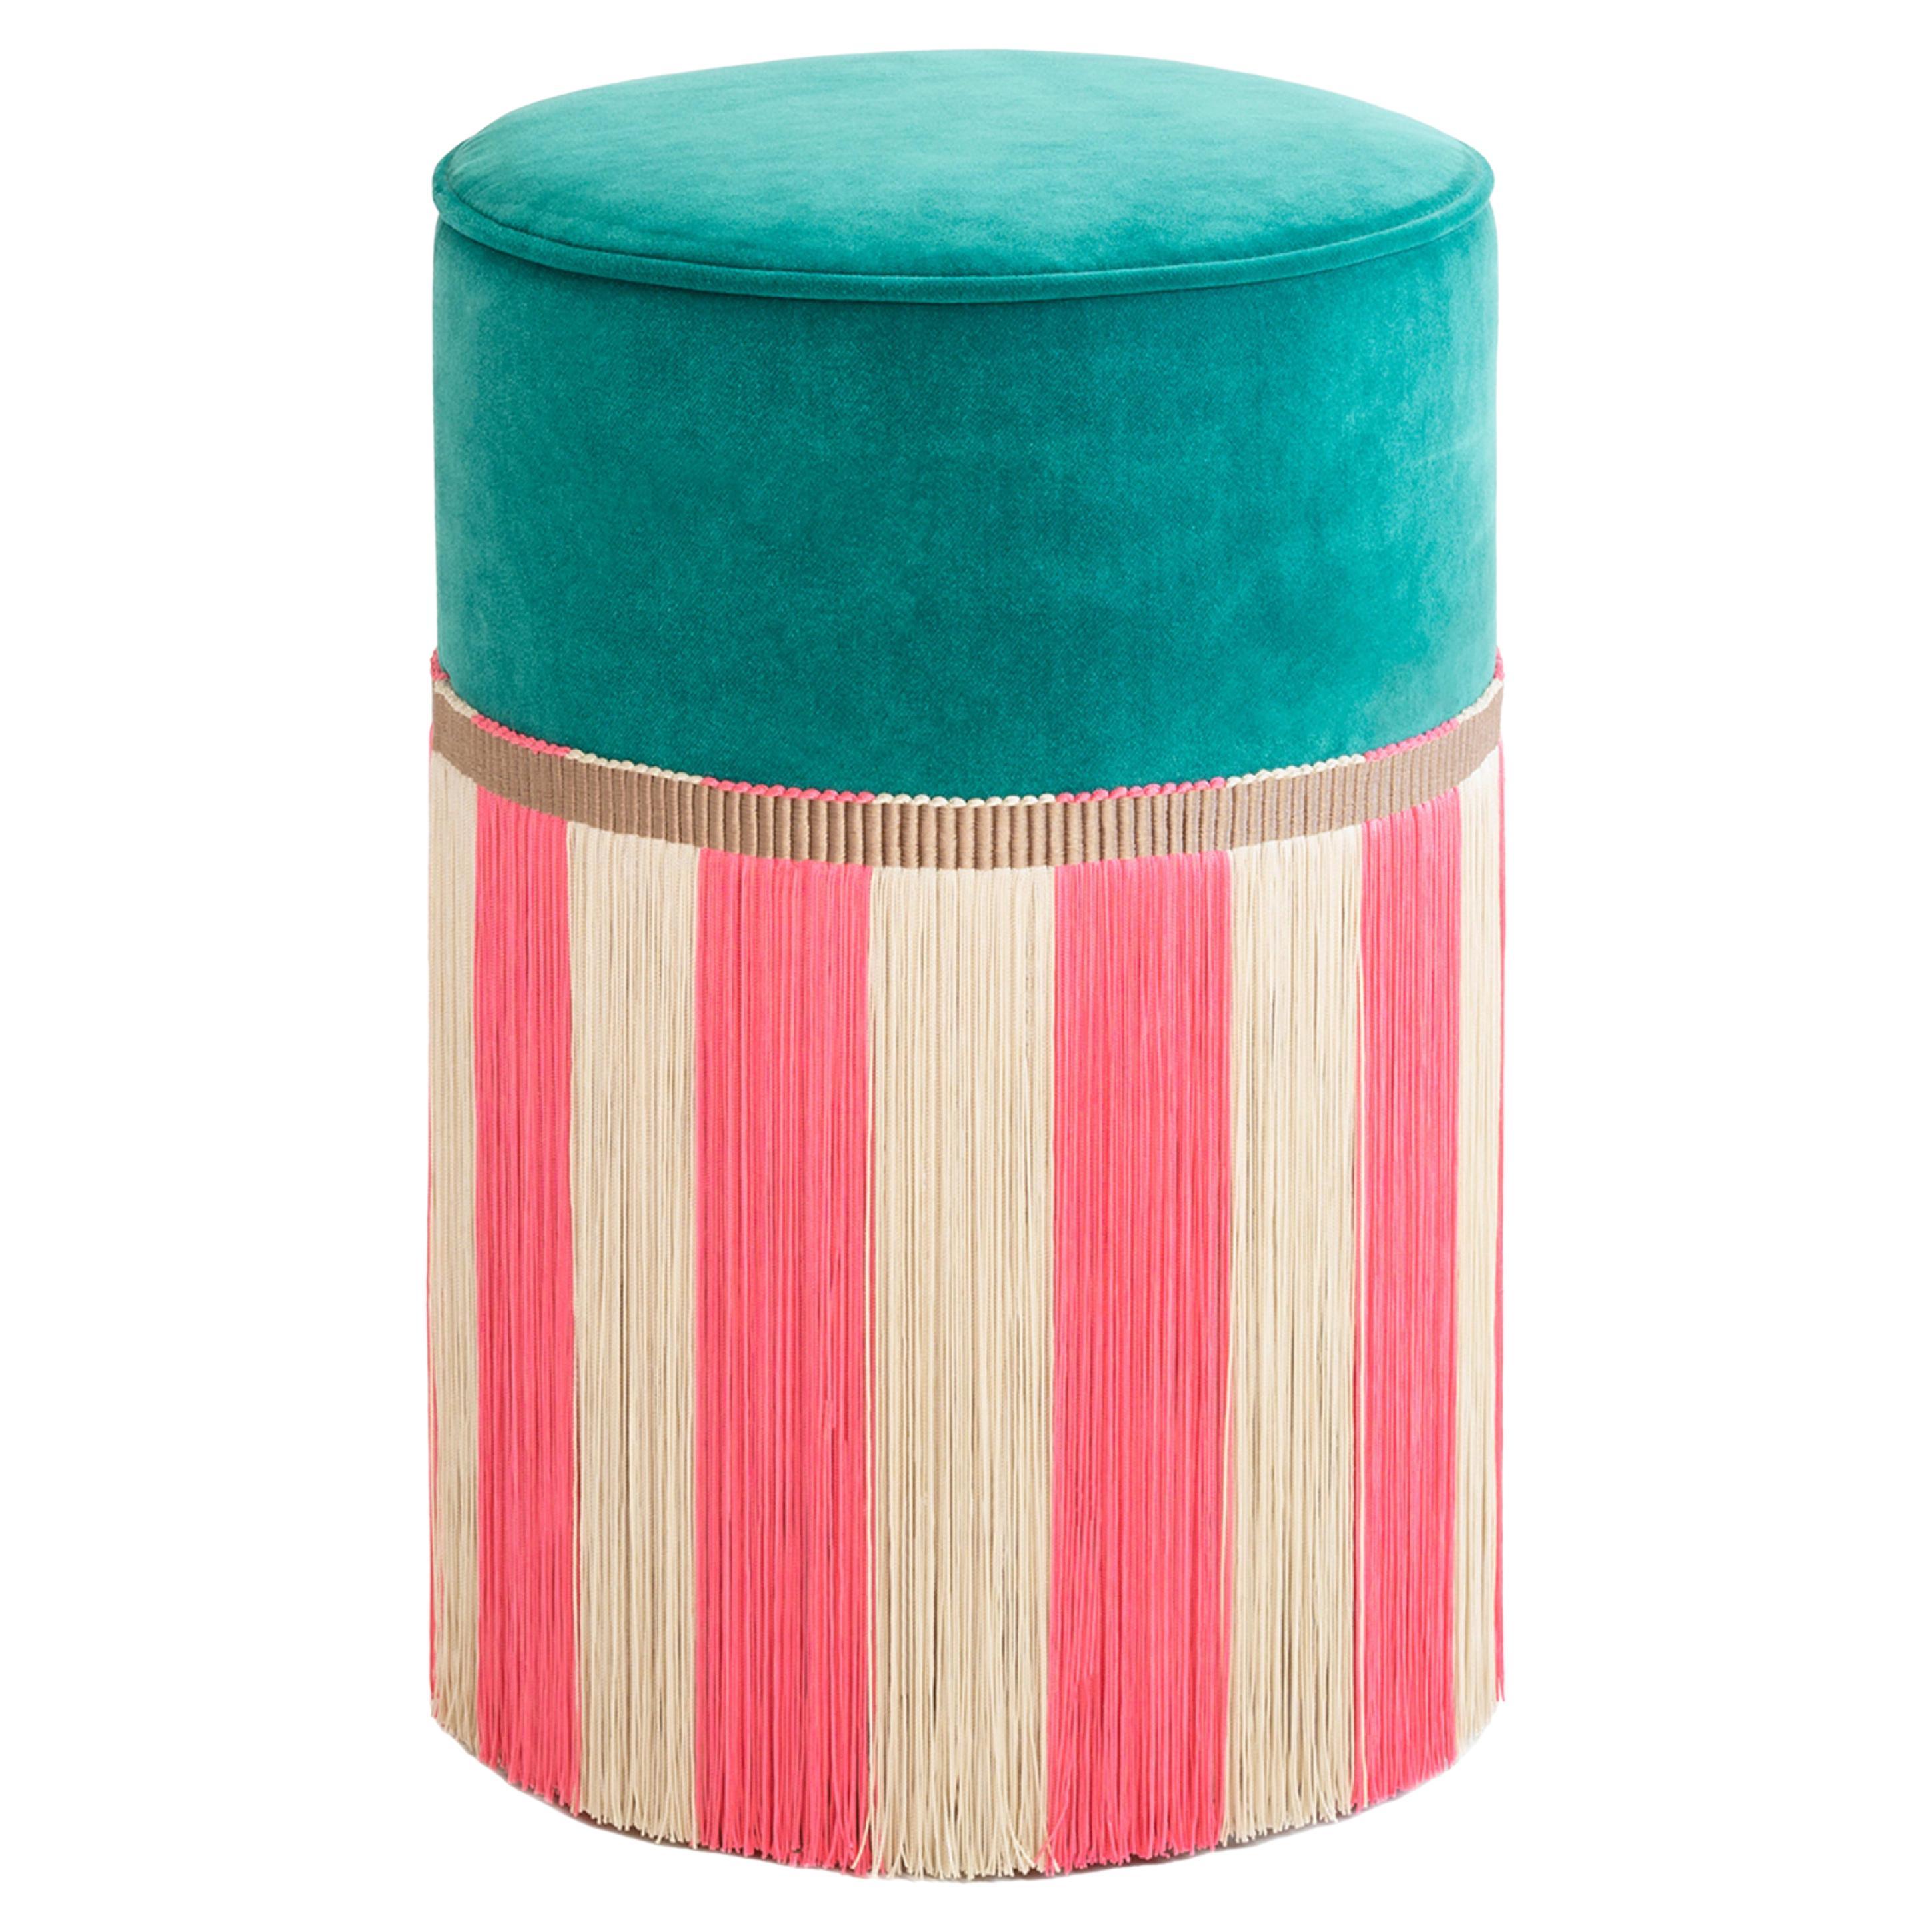 Couture Geometric Riga Small Turquoise & Pink Ottoman For Sale